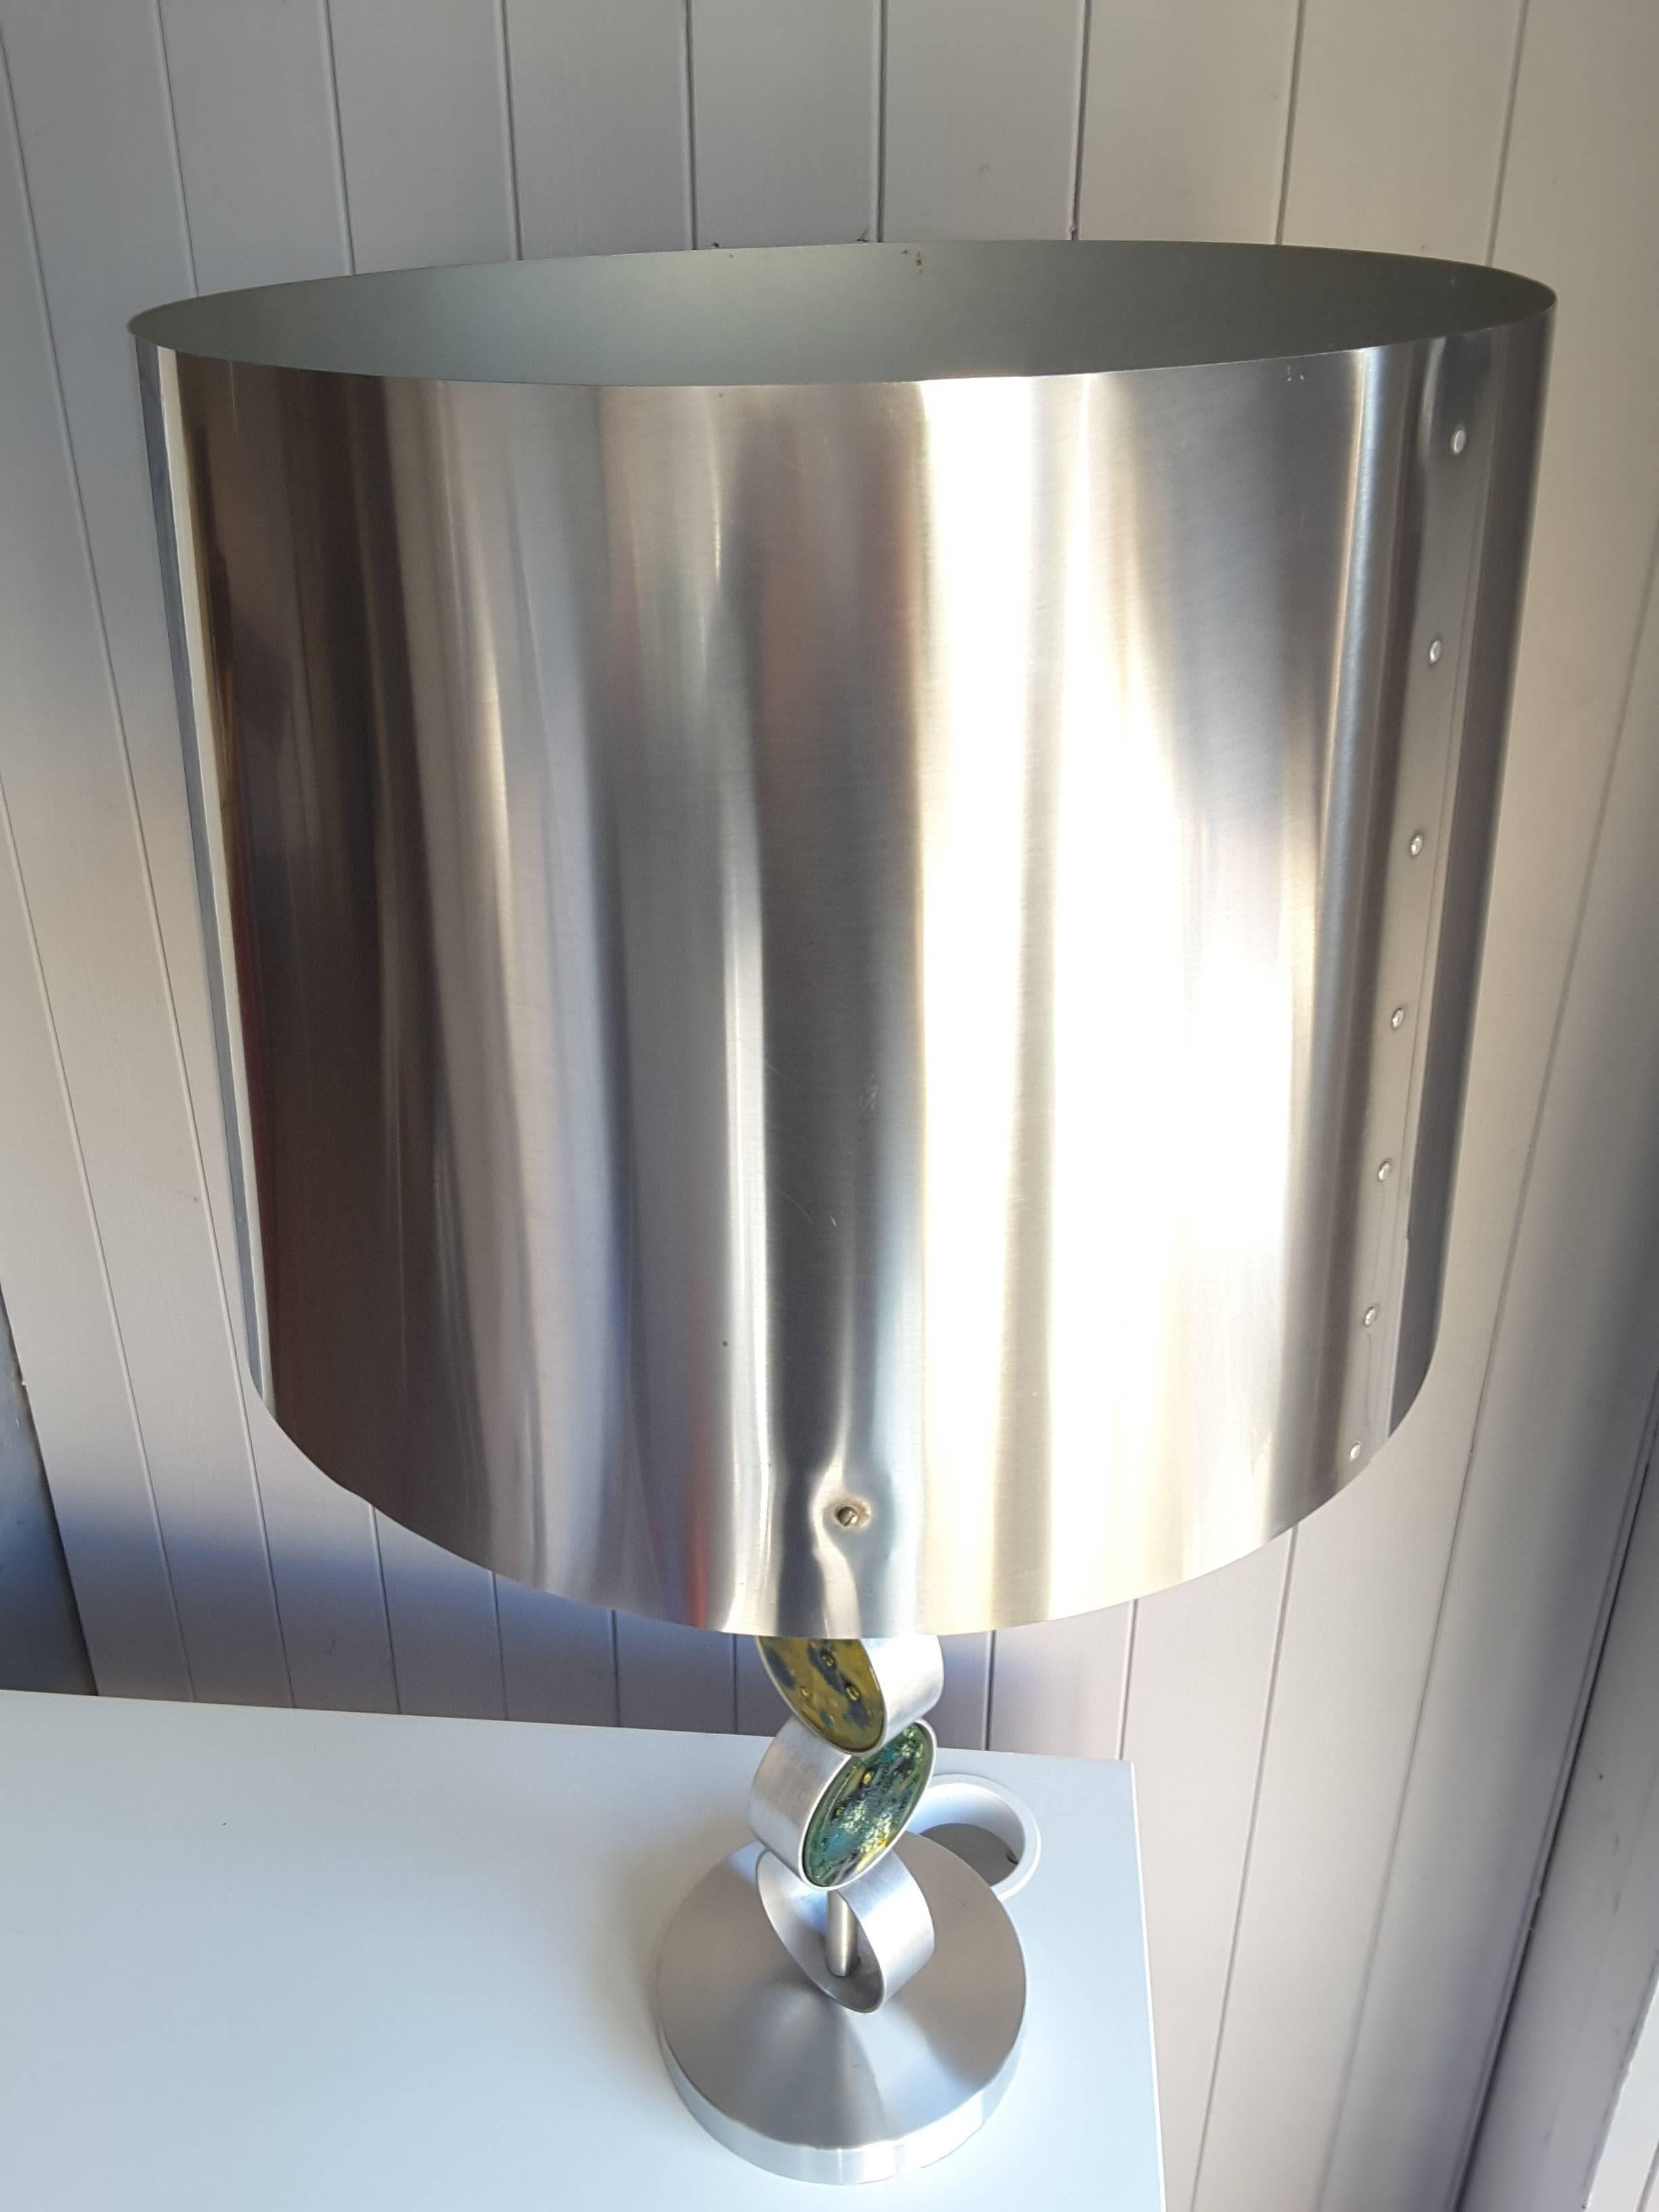 Late 20th Century Organic Modern Table Lamp by Nanny Still for RAAK of Amsterdam For Sale